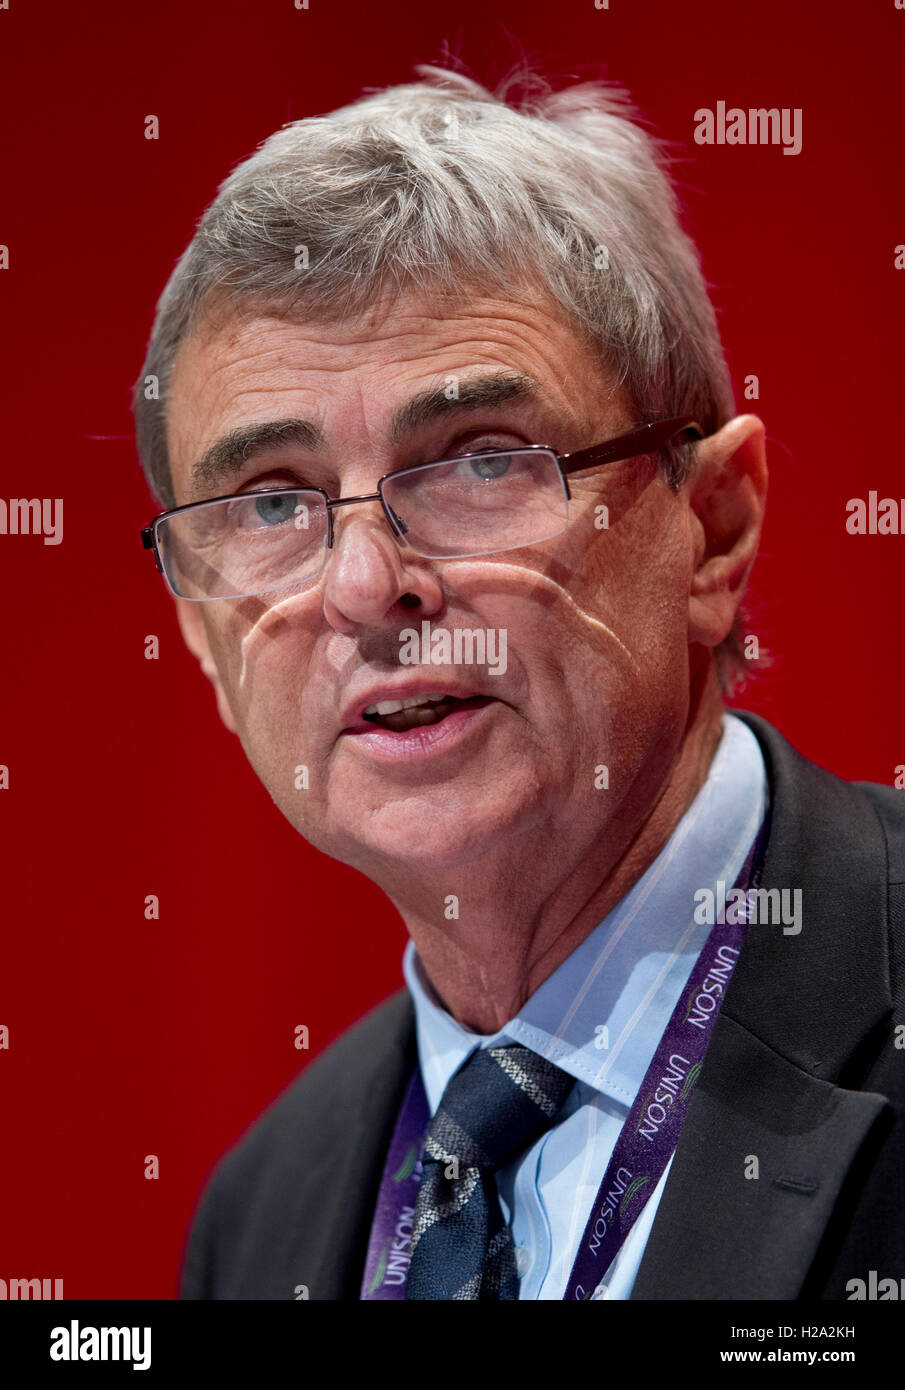 Liverpool, UK. 26th September 2016. General Secretary of UNISON Dave Prentis speaks at day two of the Labour Party Conference in Liverpool. Credit:  Russell Hart/Alamy Live News. Stock Photo